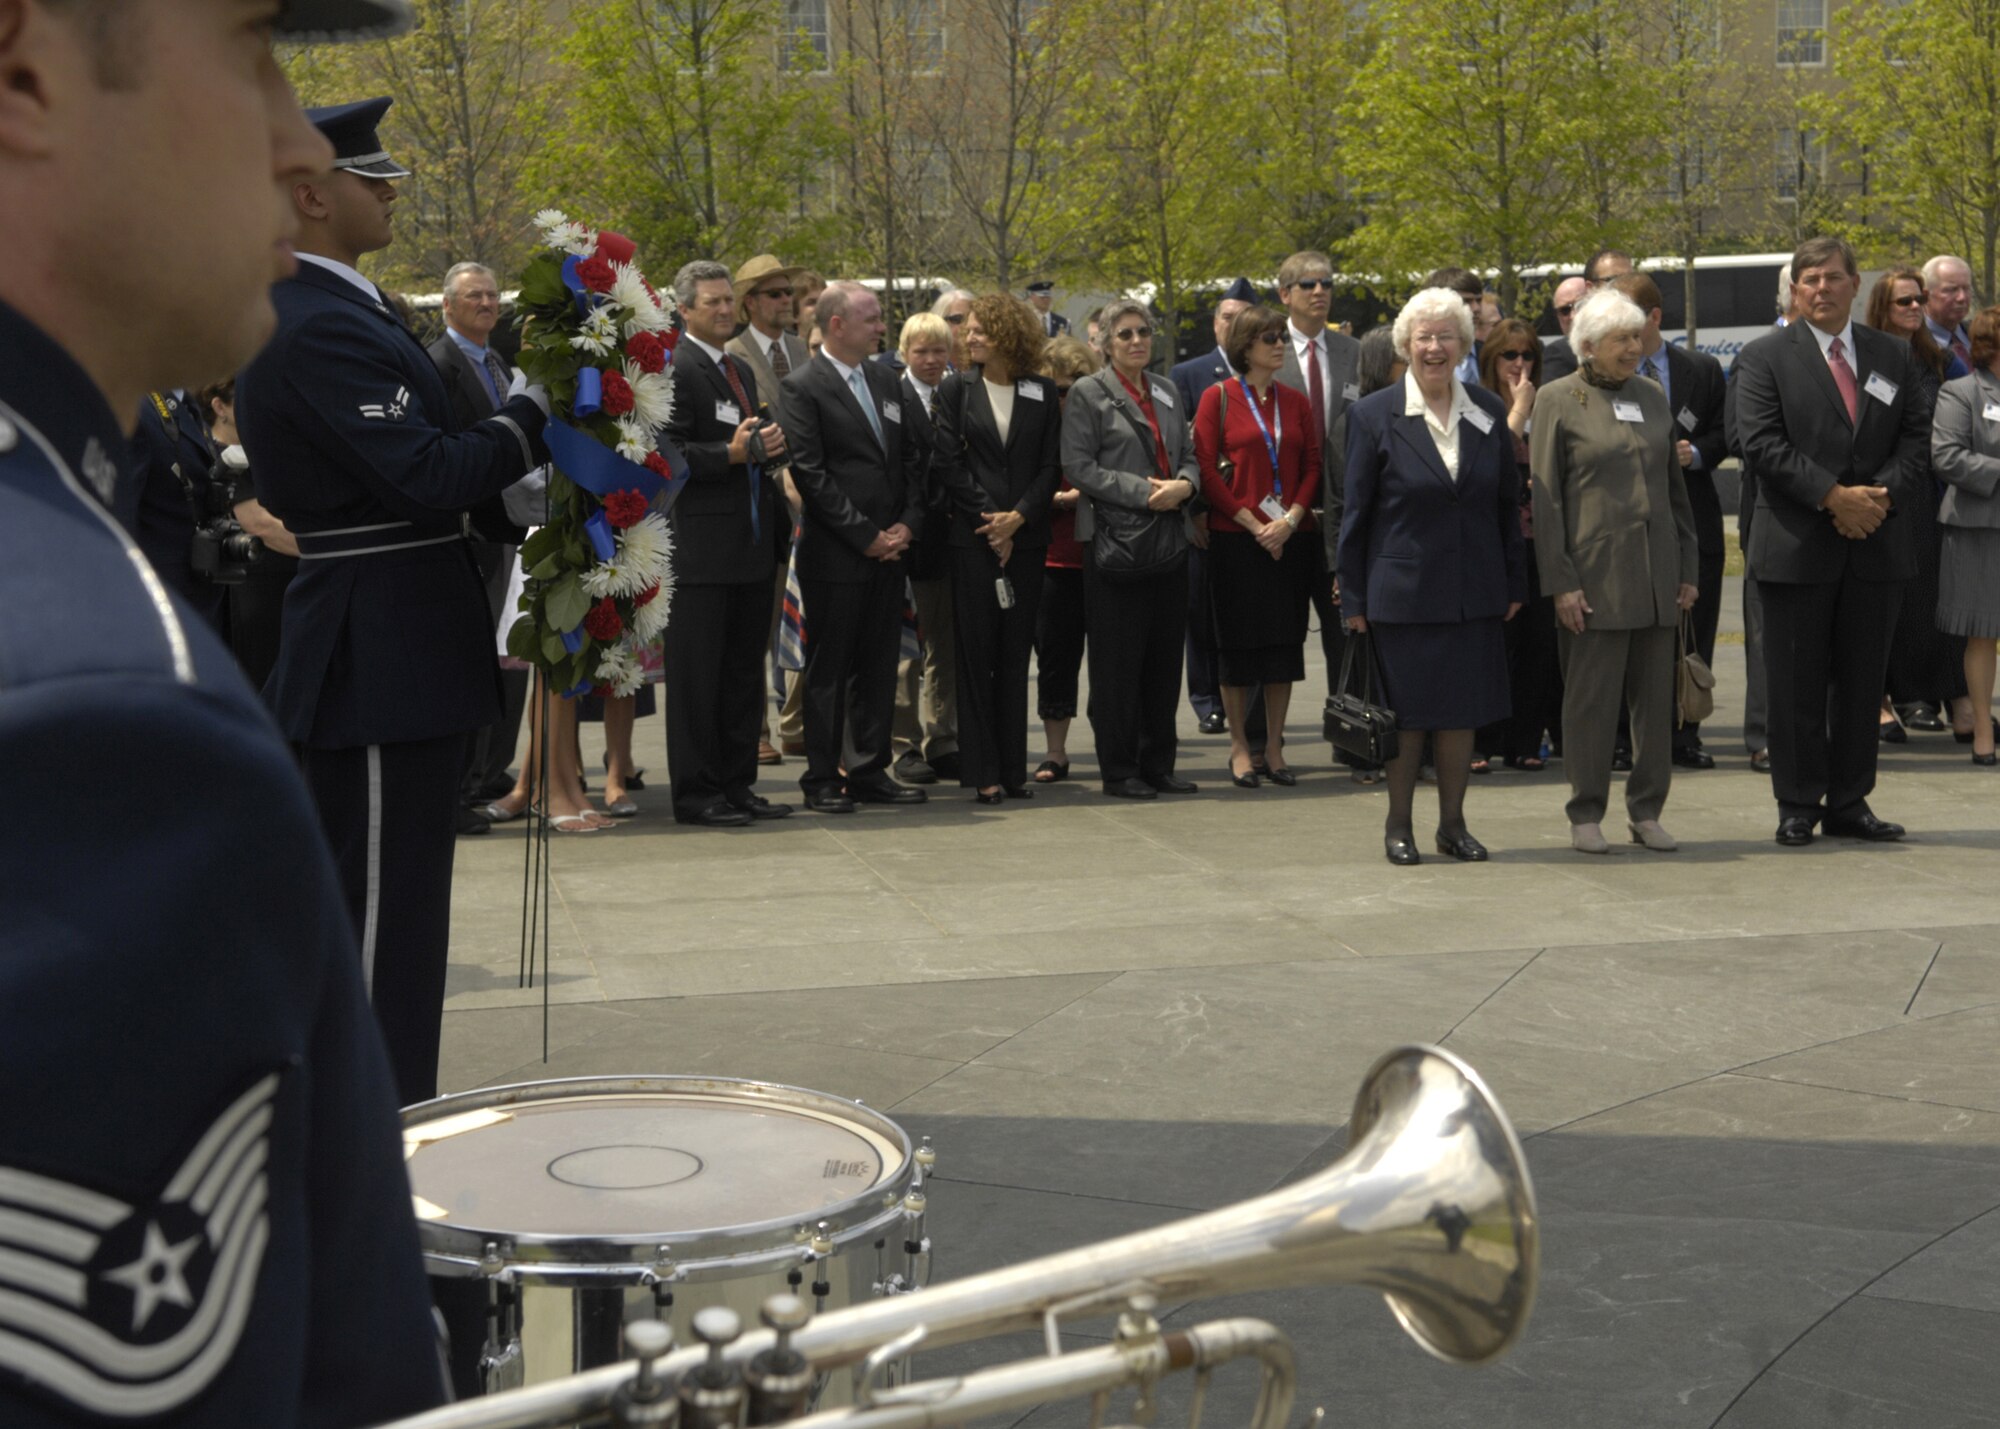 Family and friends gather in memory of the Flak Man crew, after a wreath-laying ceremony at the Air Force Memorial, Arlington, Va., April 24. The wreath was placed by Edward McNally, the Bombardier of the B-24 Bomber, The Flak Man, in honor of the former crew members of the Flak Man who dedicated their lives to the cause of freedom. (U.S. Air Force photo by Senior Airman Rusti Caraker)